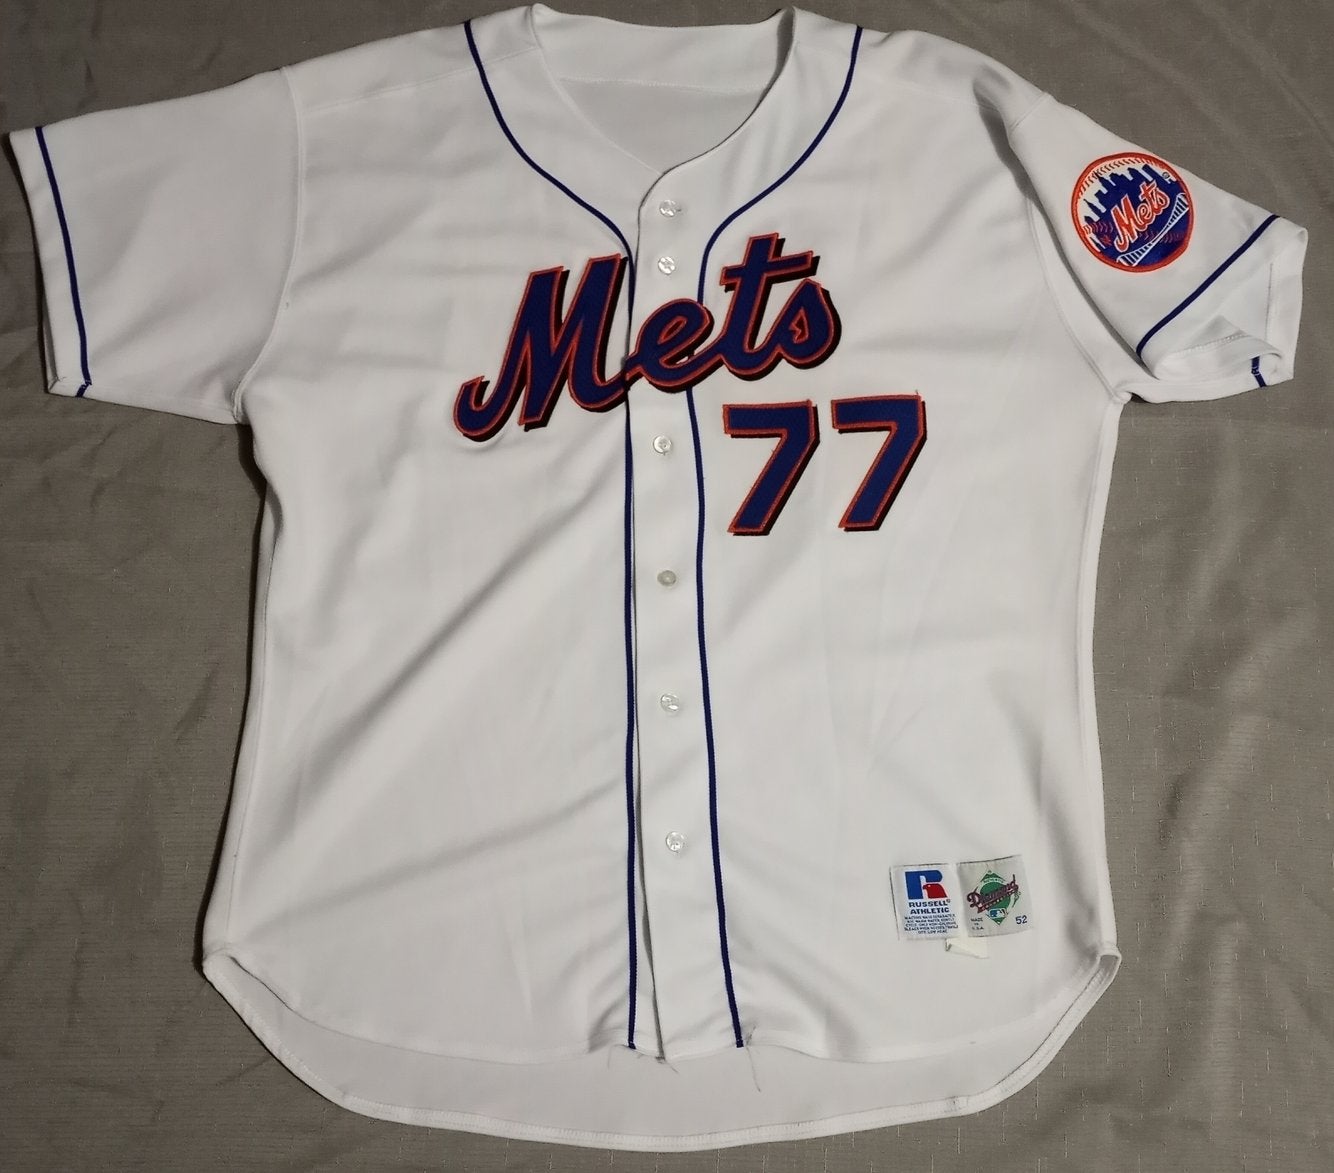 🔥Vintage No.44 NEW YORK METS (XL) T-Shirt 👕 Jersey by Majestic🔥